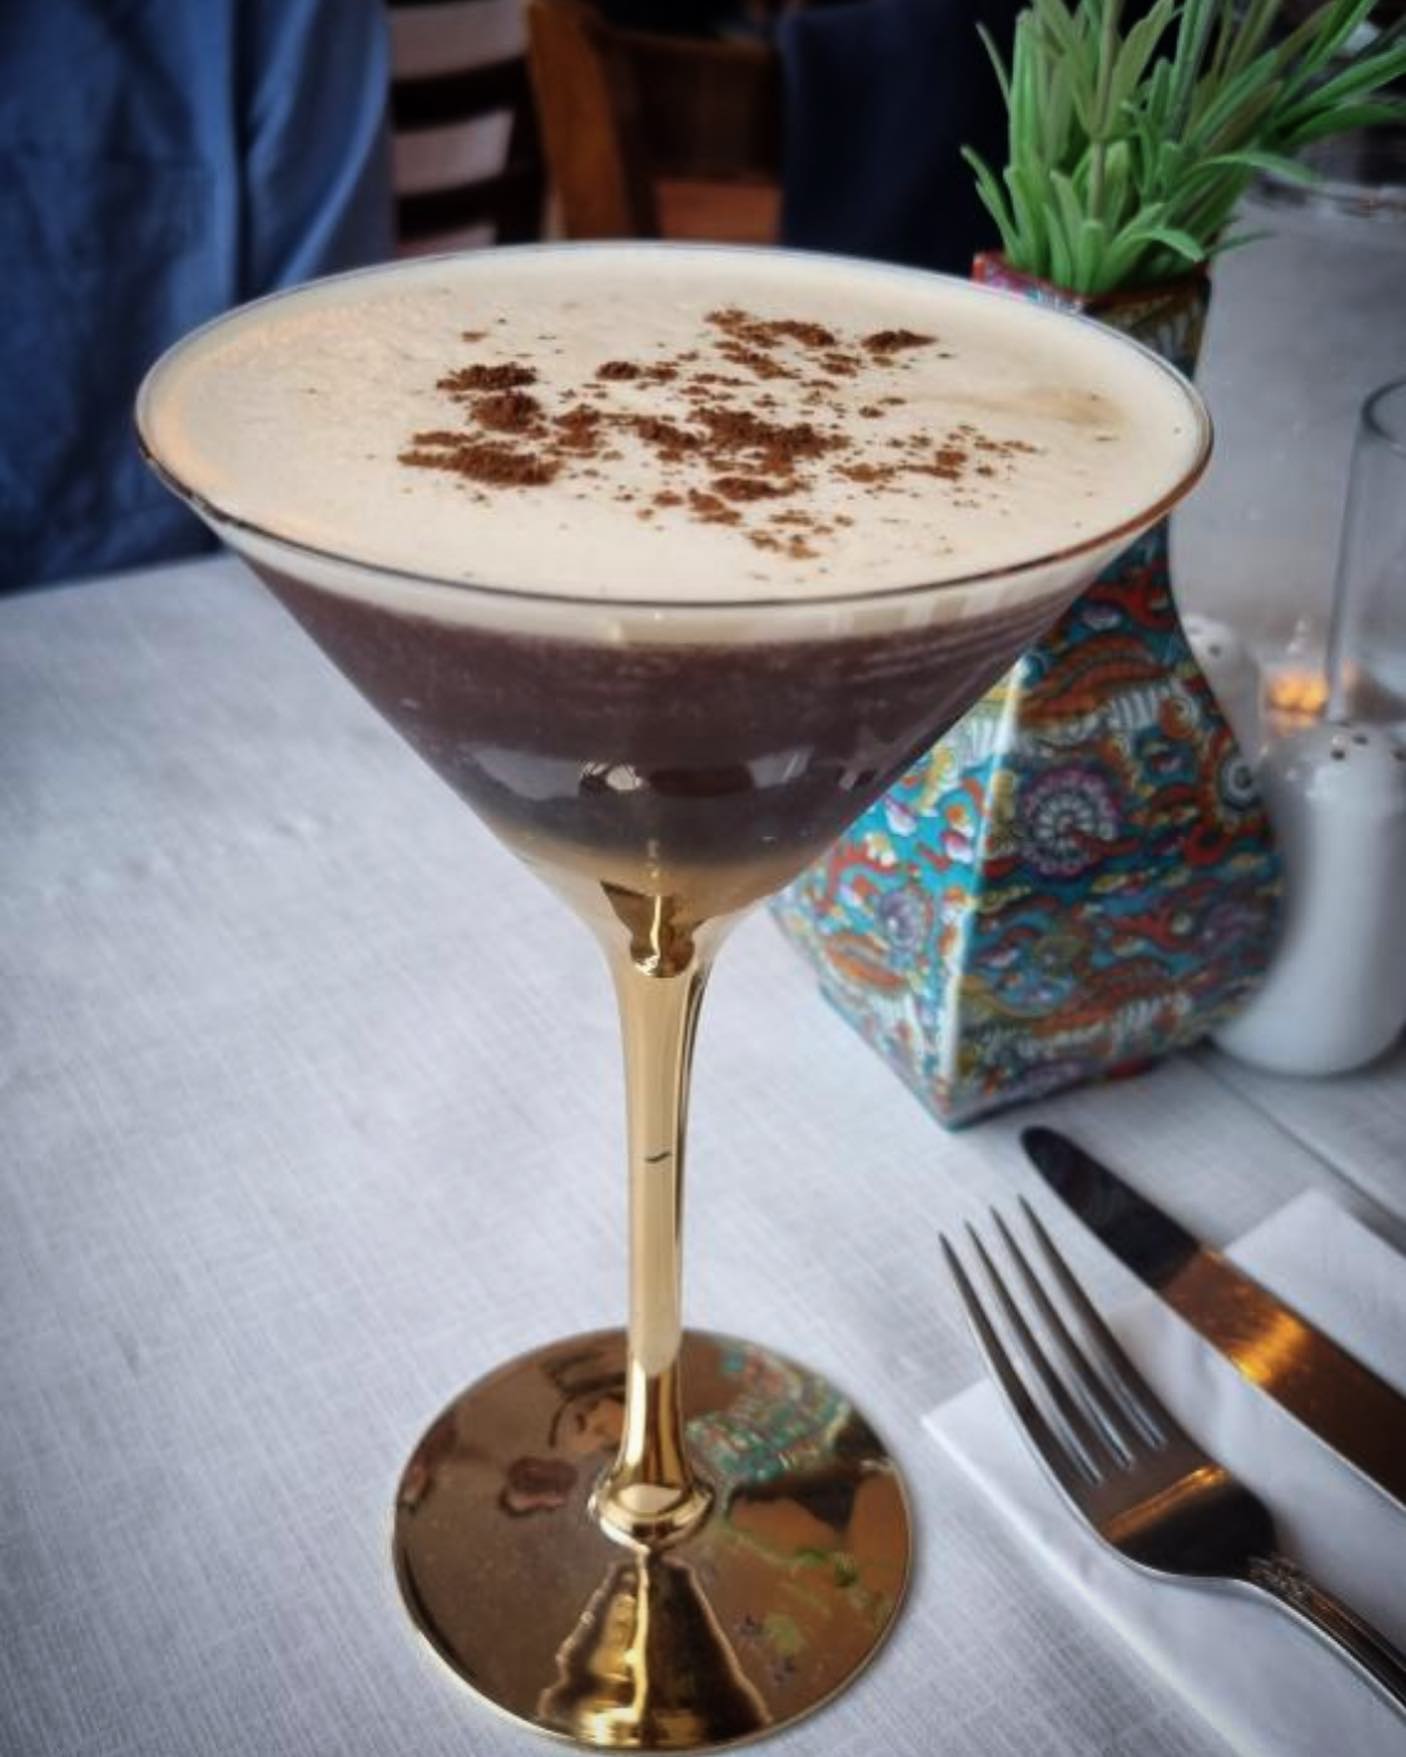 Midweek treats ready and waiting for you today at LOCANTA 😉👌🍸🍸🍸

#cocktails #martiniespresso #cocktail #jq #jewelleryquarter #midweekmotivation #stpaulssquare #restaurant

📸 @kavita_dhande